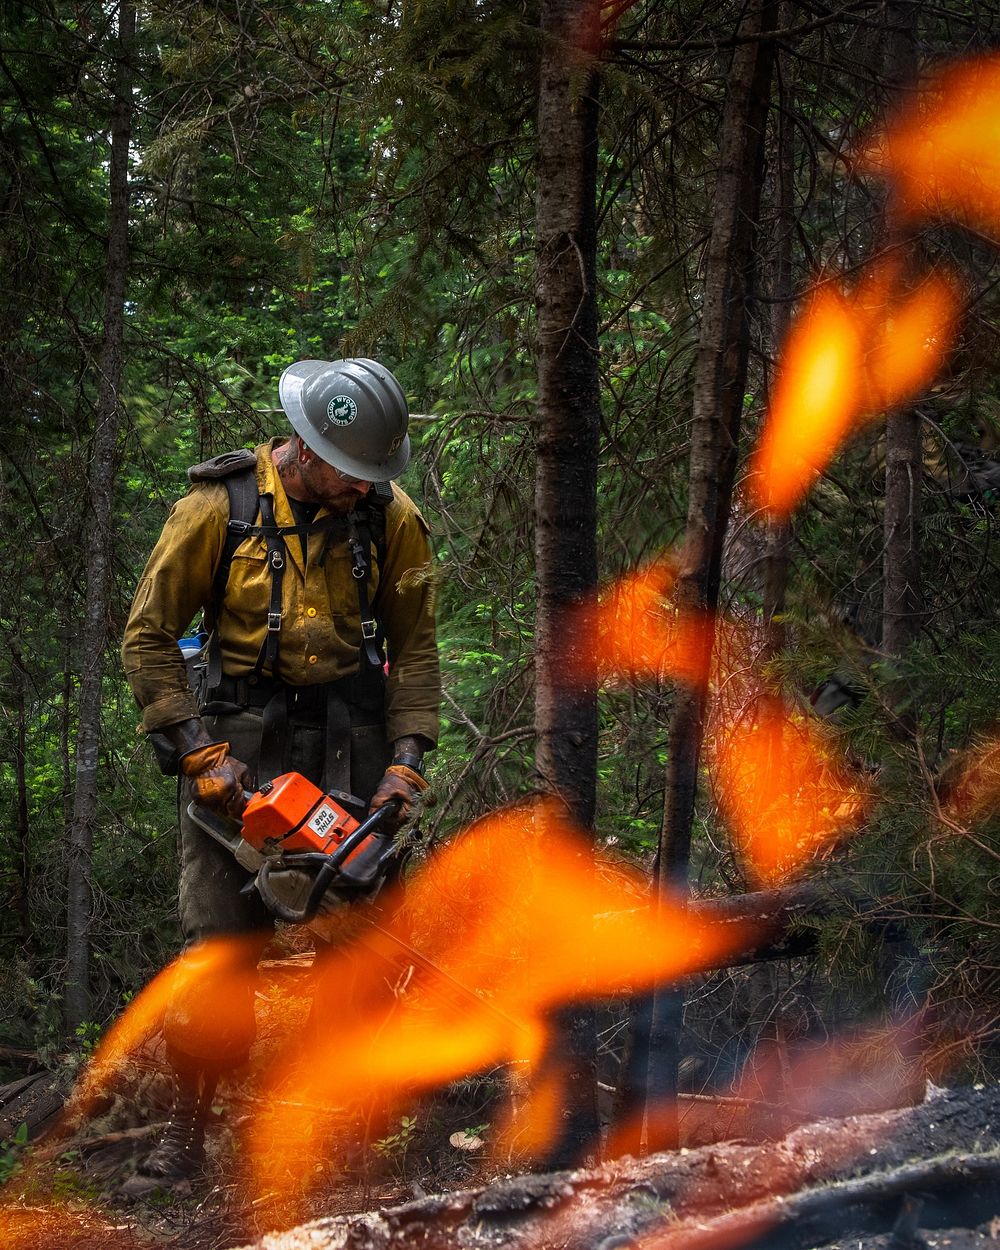 Muddy Slide Fire. Wyoming Hotshot operates a chainsaw on the Muddy Slide Fire in Colorado. Photo by Kyle Miller, Wyoming…